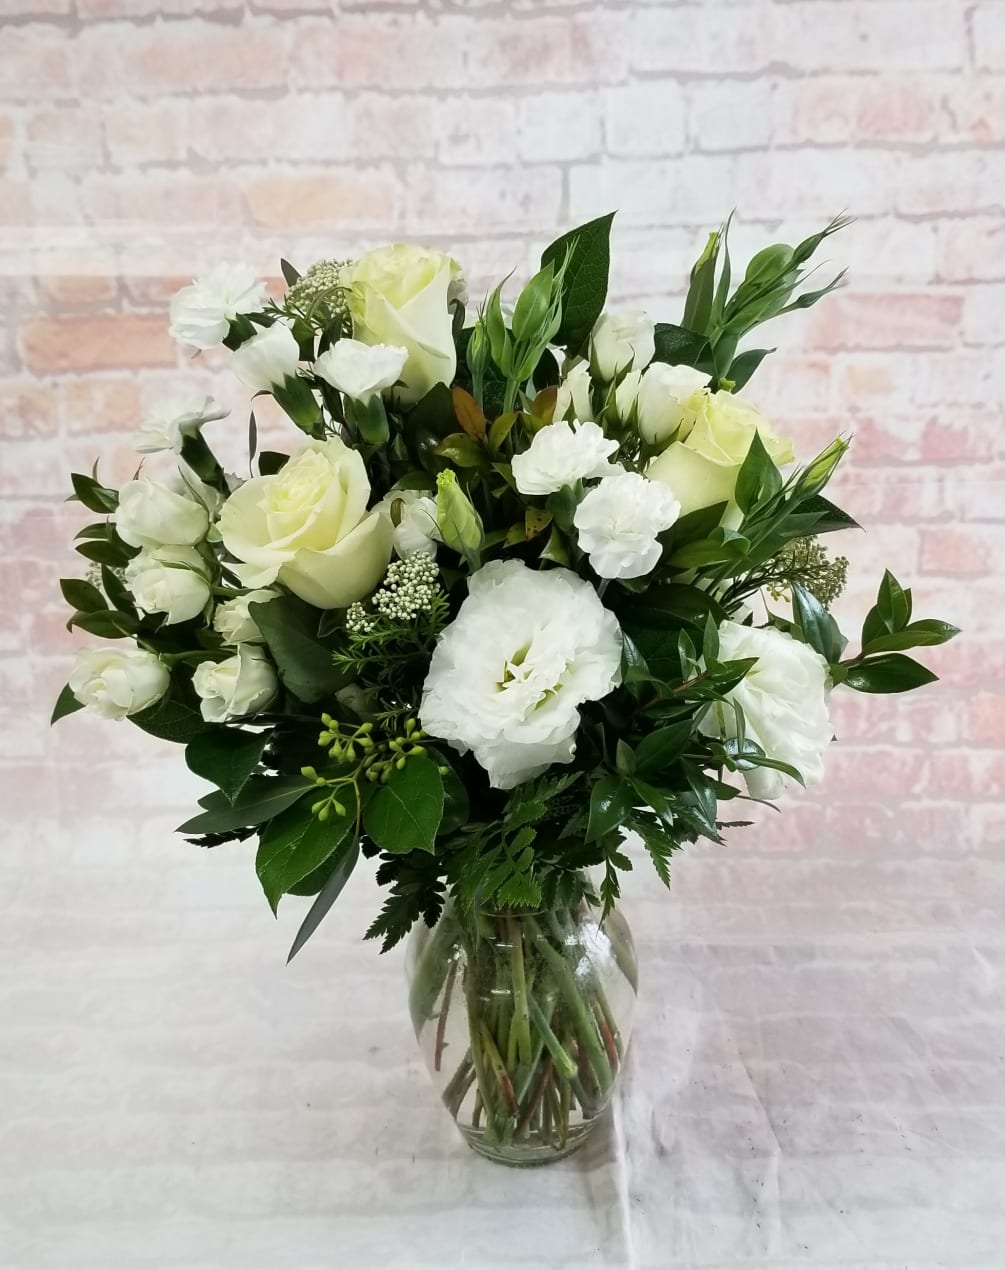 Select this pure white combination of flowers in a clear glass vase.